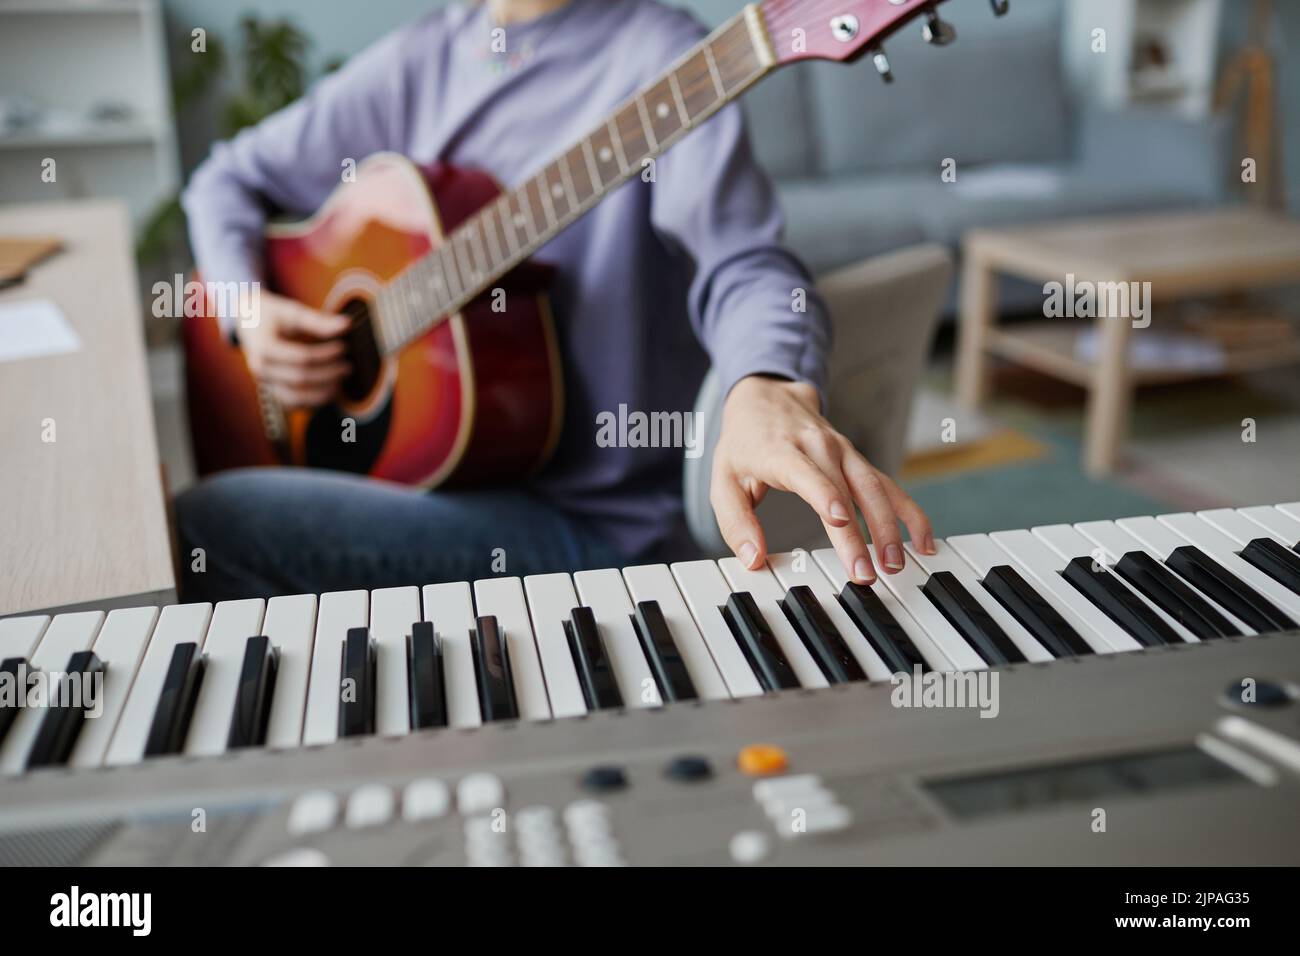 Close up of young woman pressing piano key while composing music at home, copy space Stock Photo